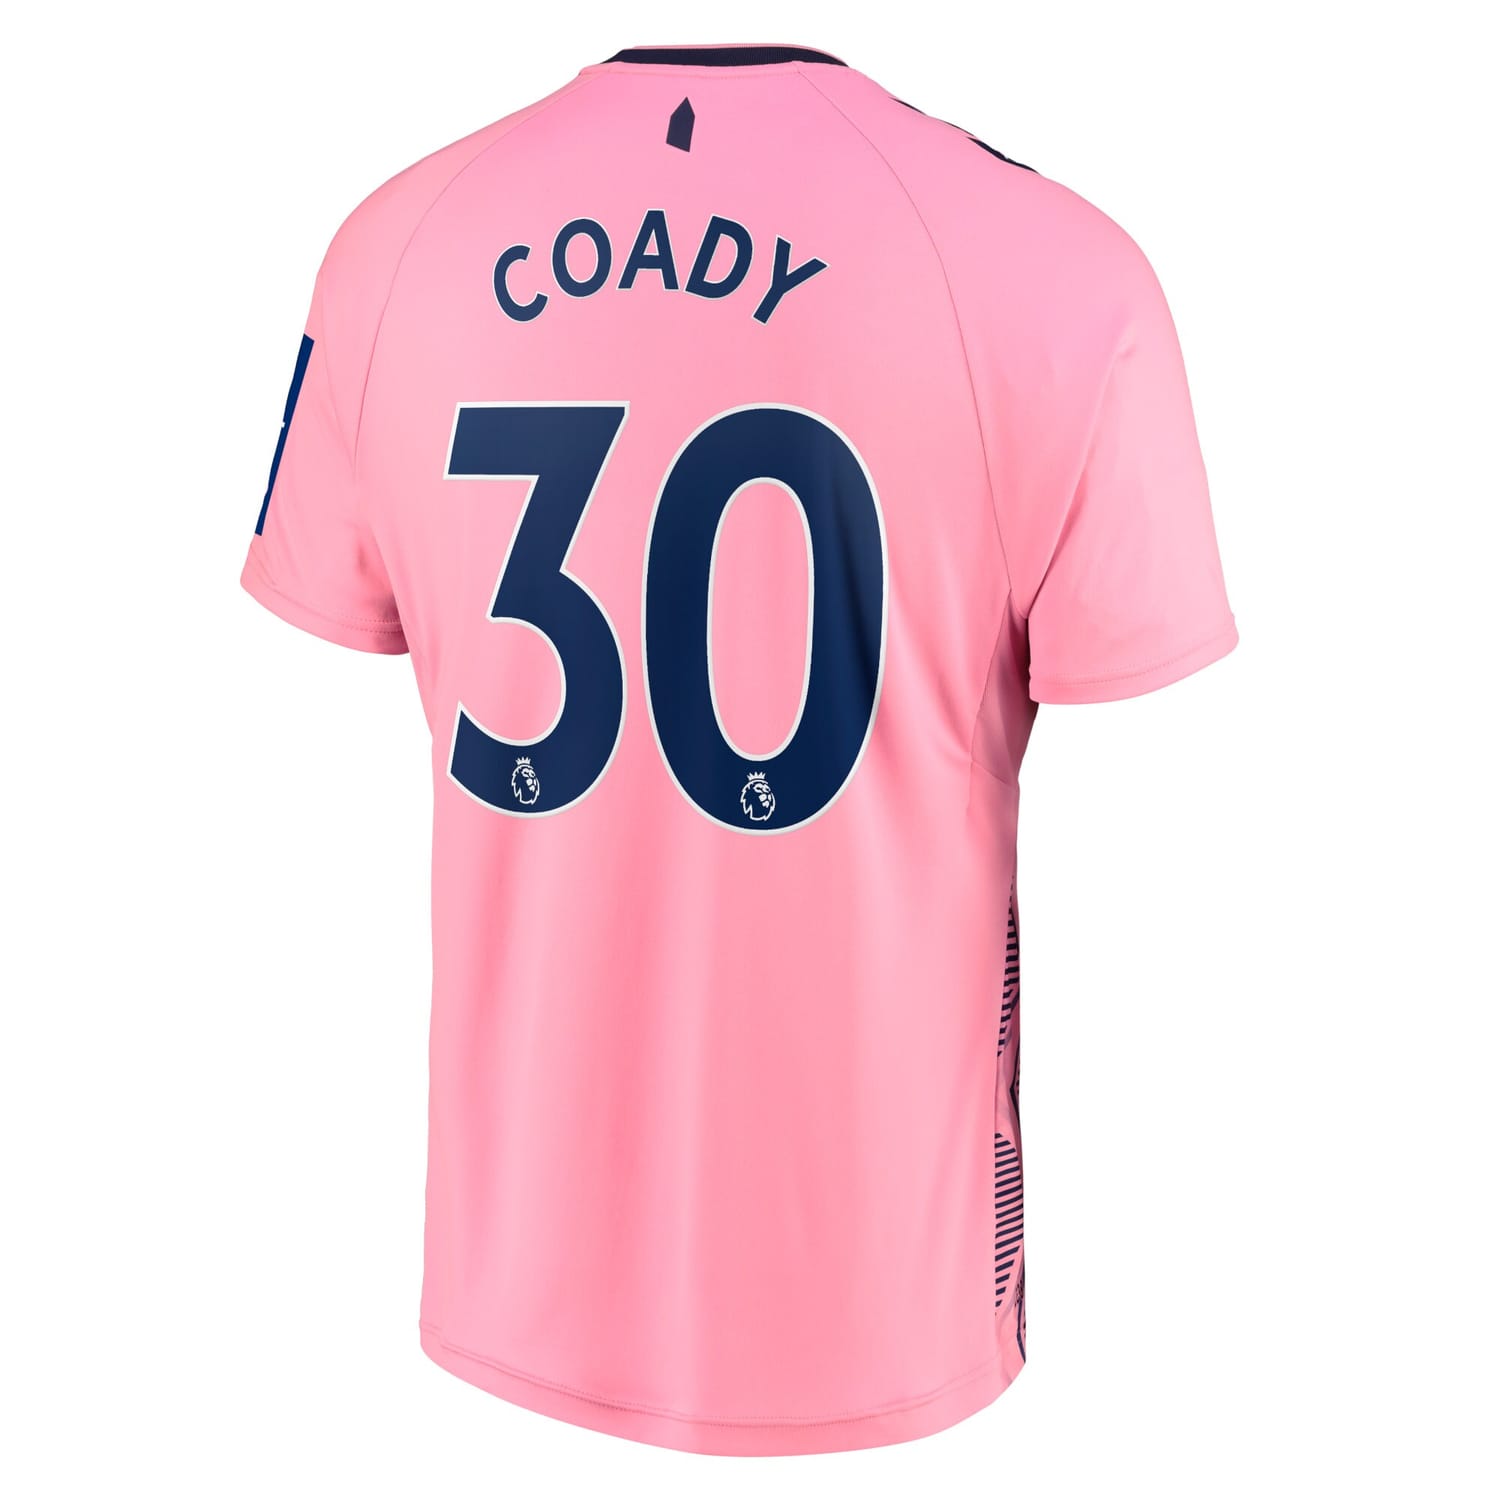 Premier League Everton Away Jersey Shirt 2022-23 player Conor Coady 30 printing for Men